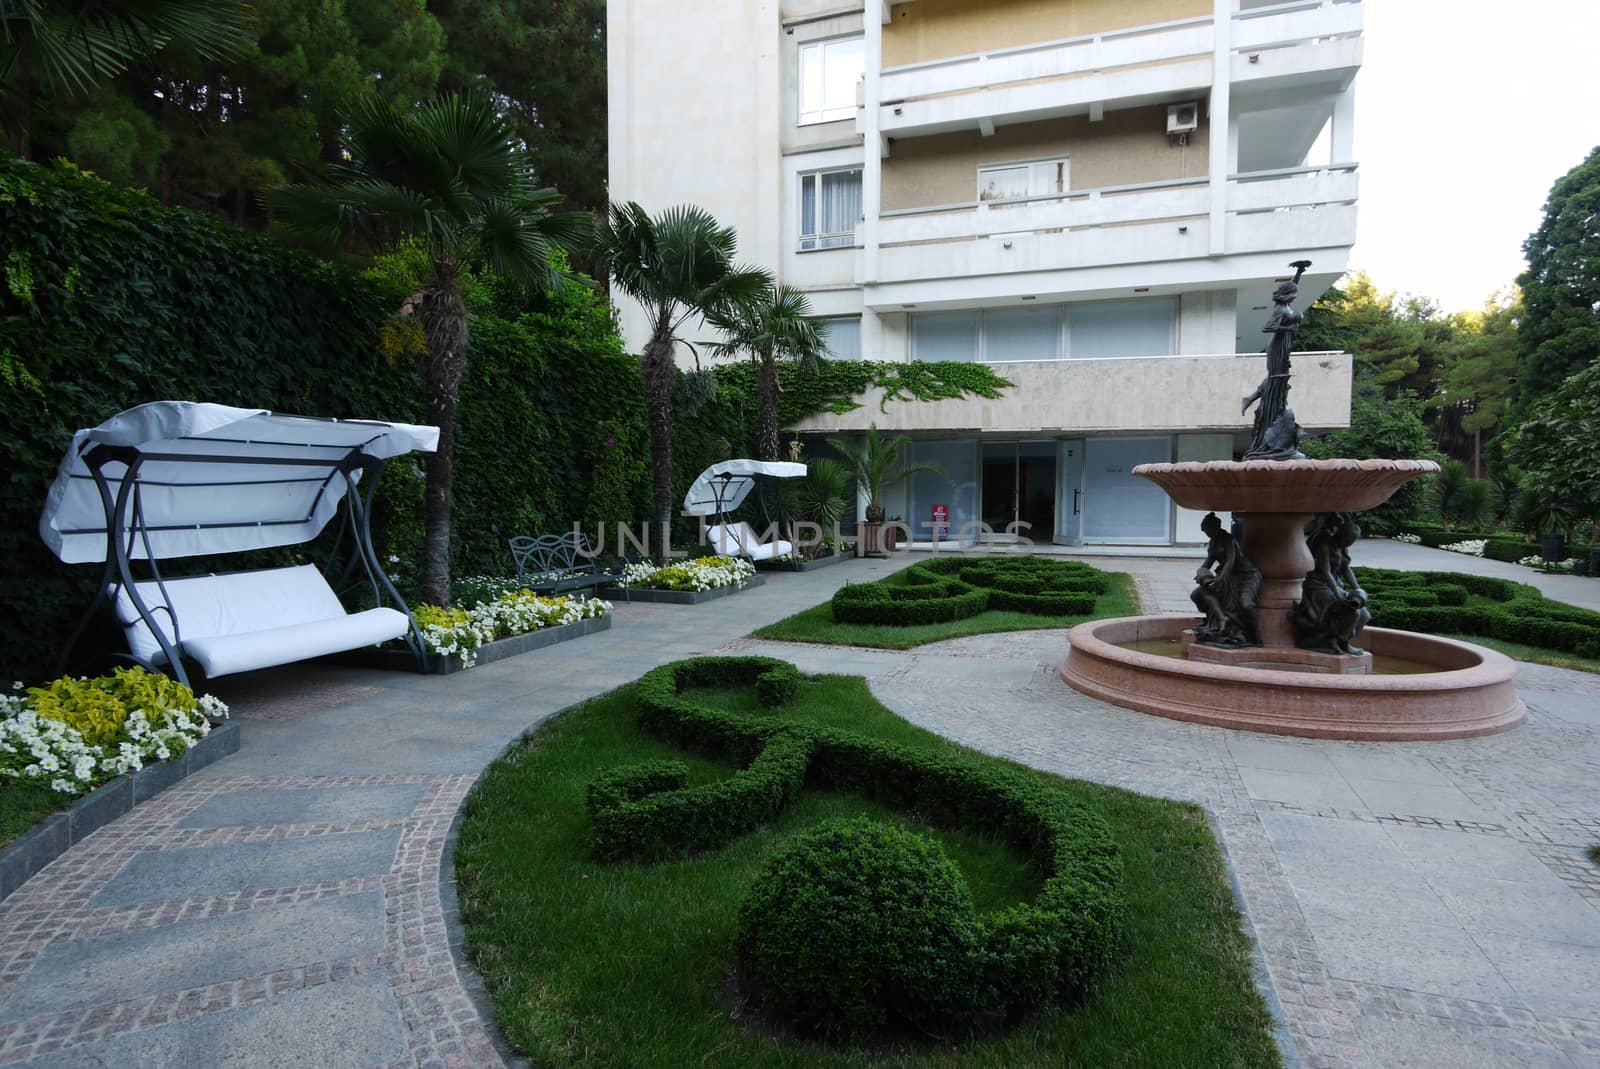 A chic interior courtyard near the hotel with an elegant fountain with sculptures by a designer lawn and white benches with a canopy with beautiful flowers growing next to it. by Adamchuk